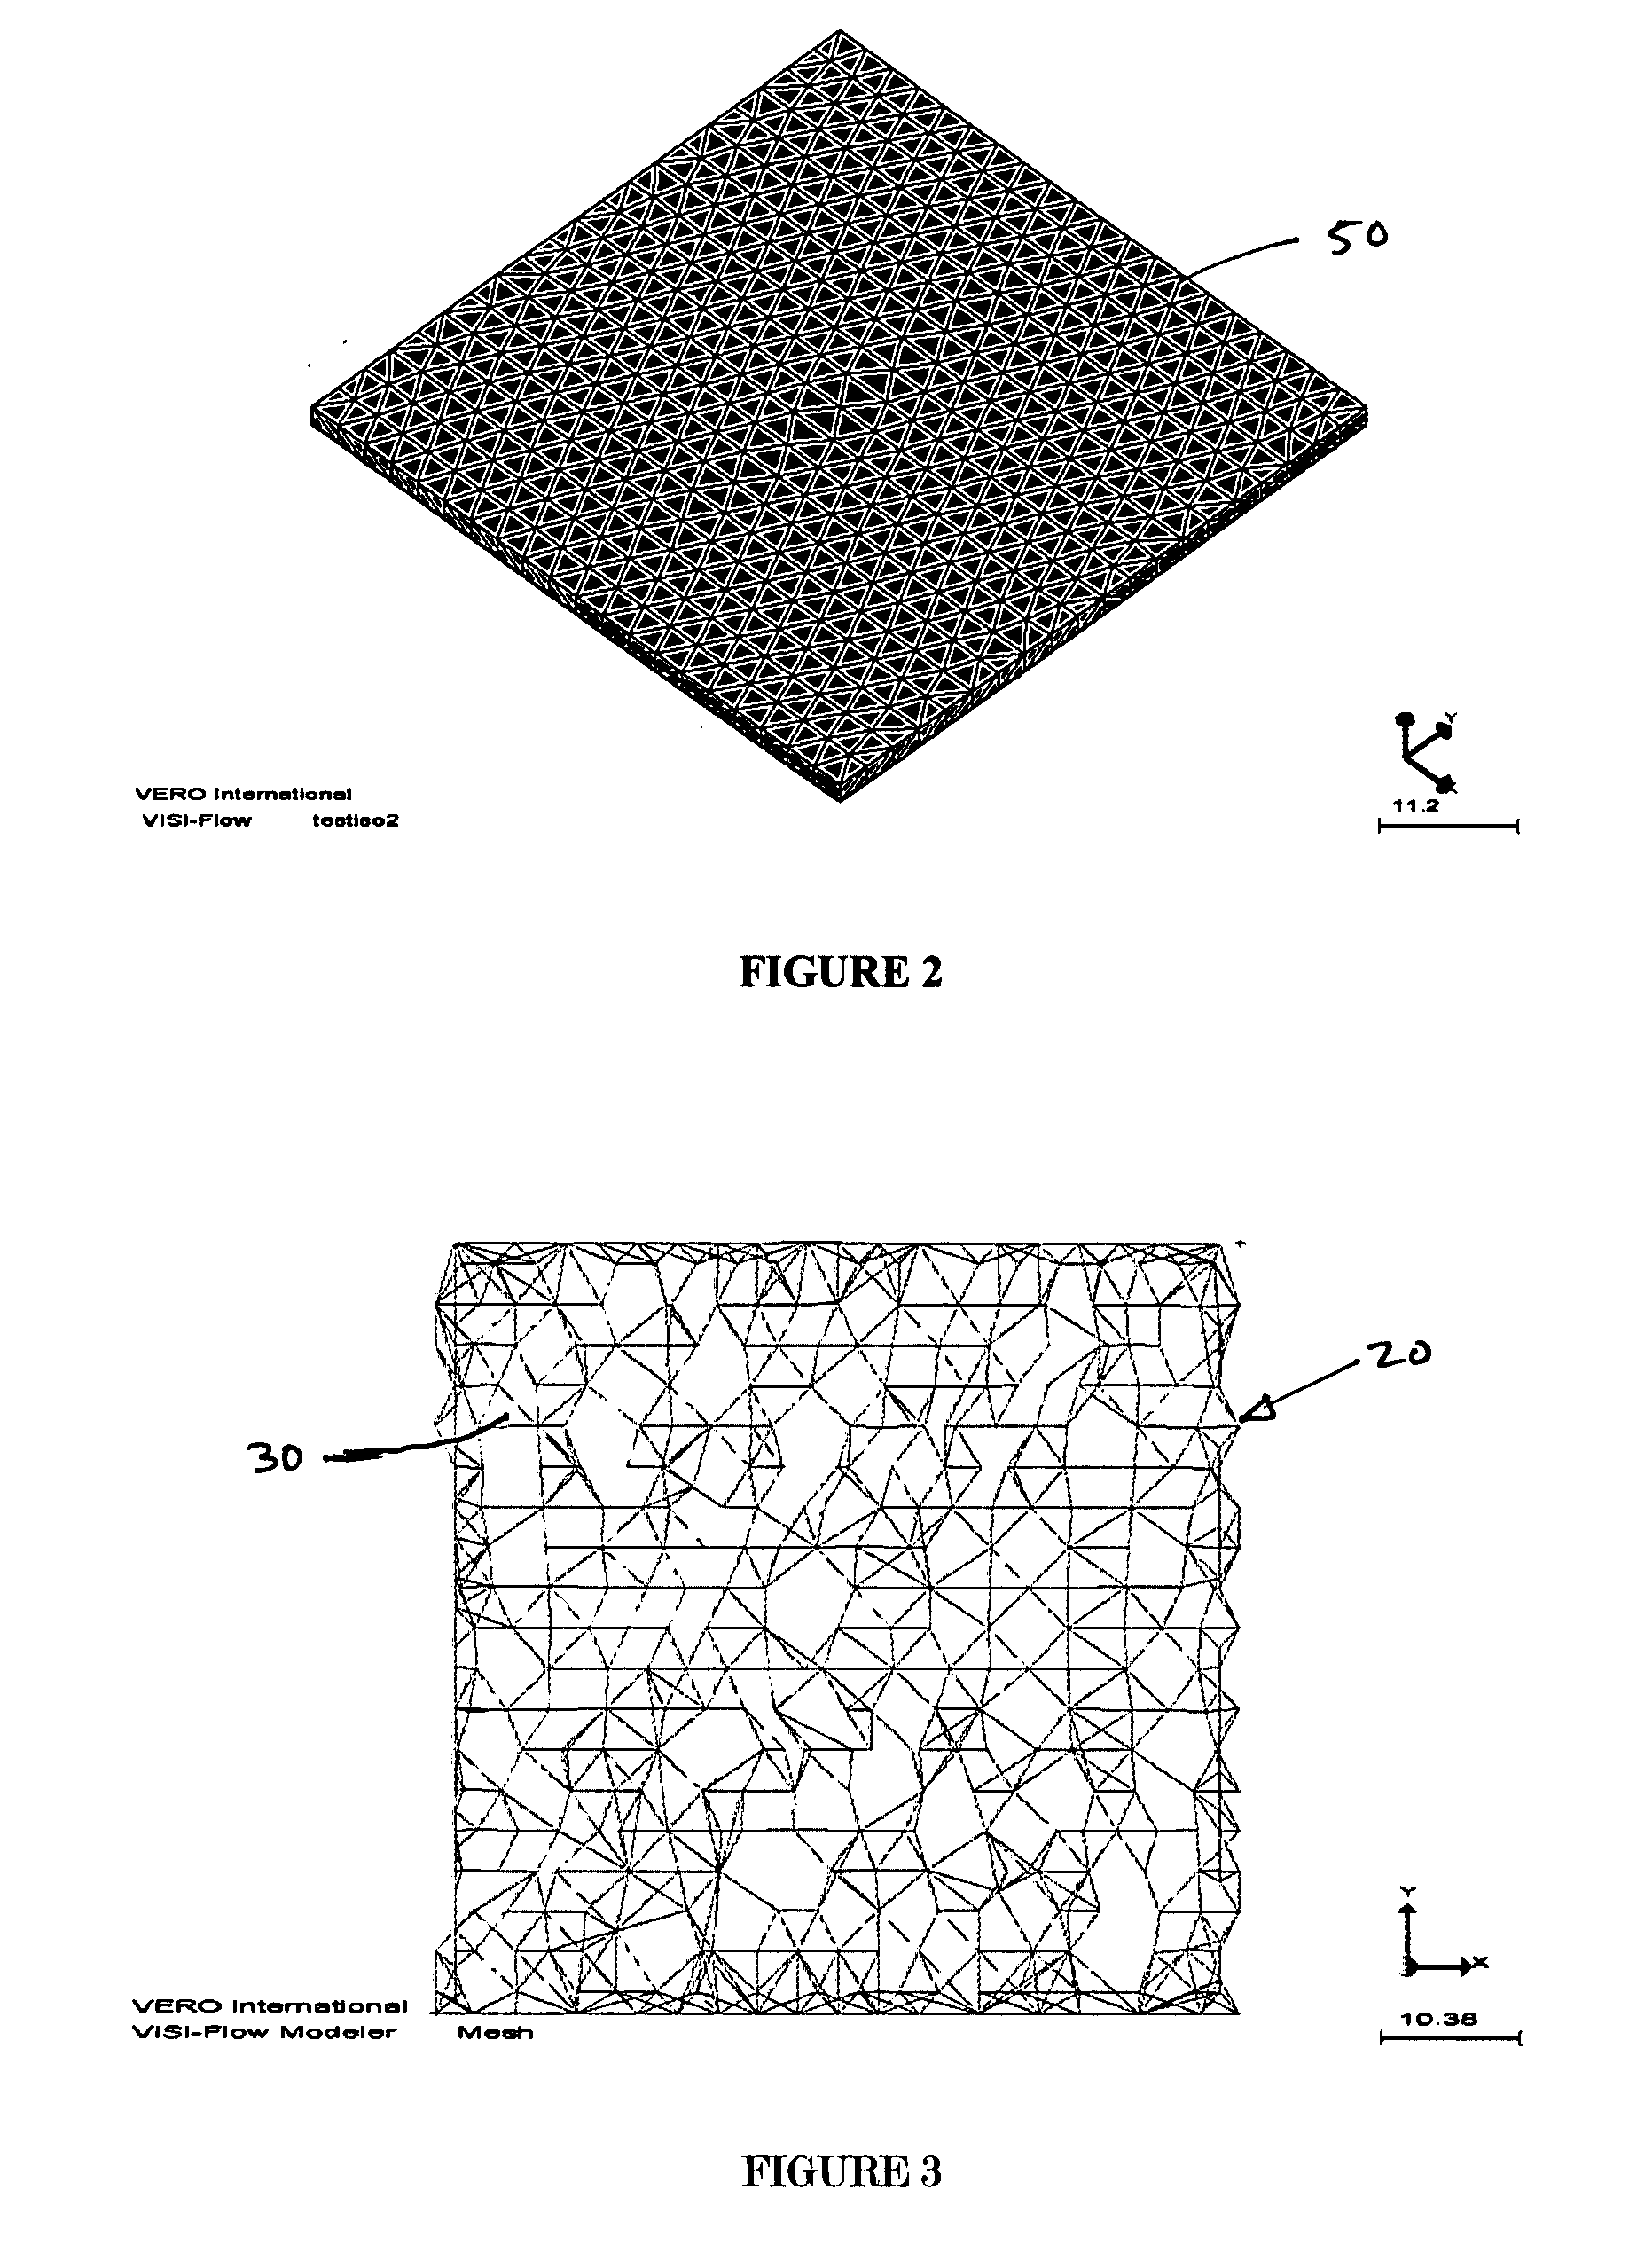 Method for analyzing fluid flow within a three-dimensional object